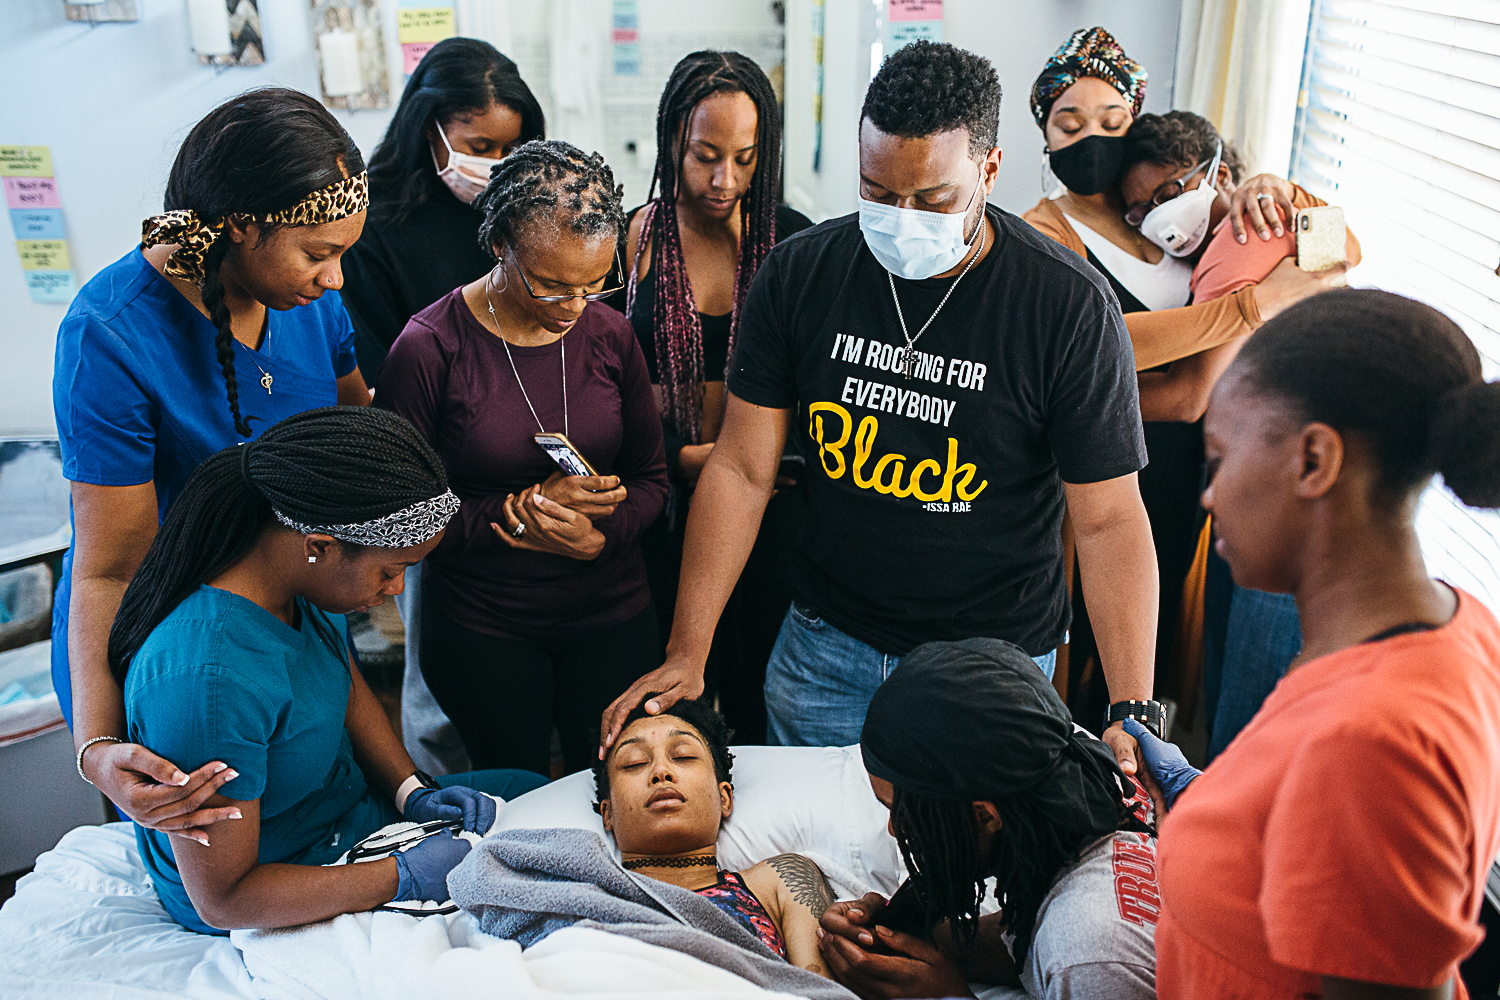 black mother holding her newborn surrounded by her family praying tshirt reads I'm Rooting for Everybody Black